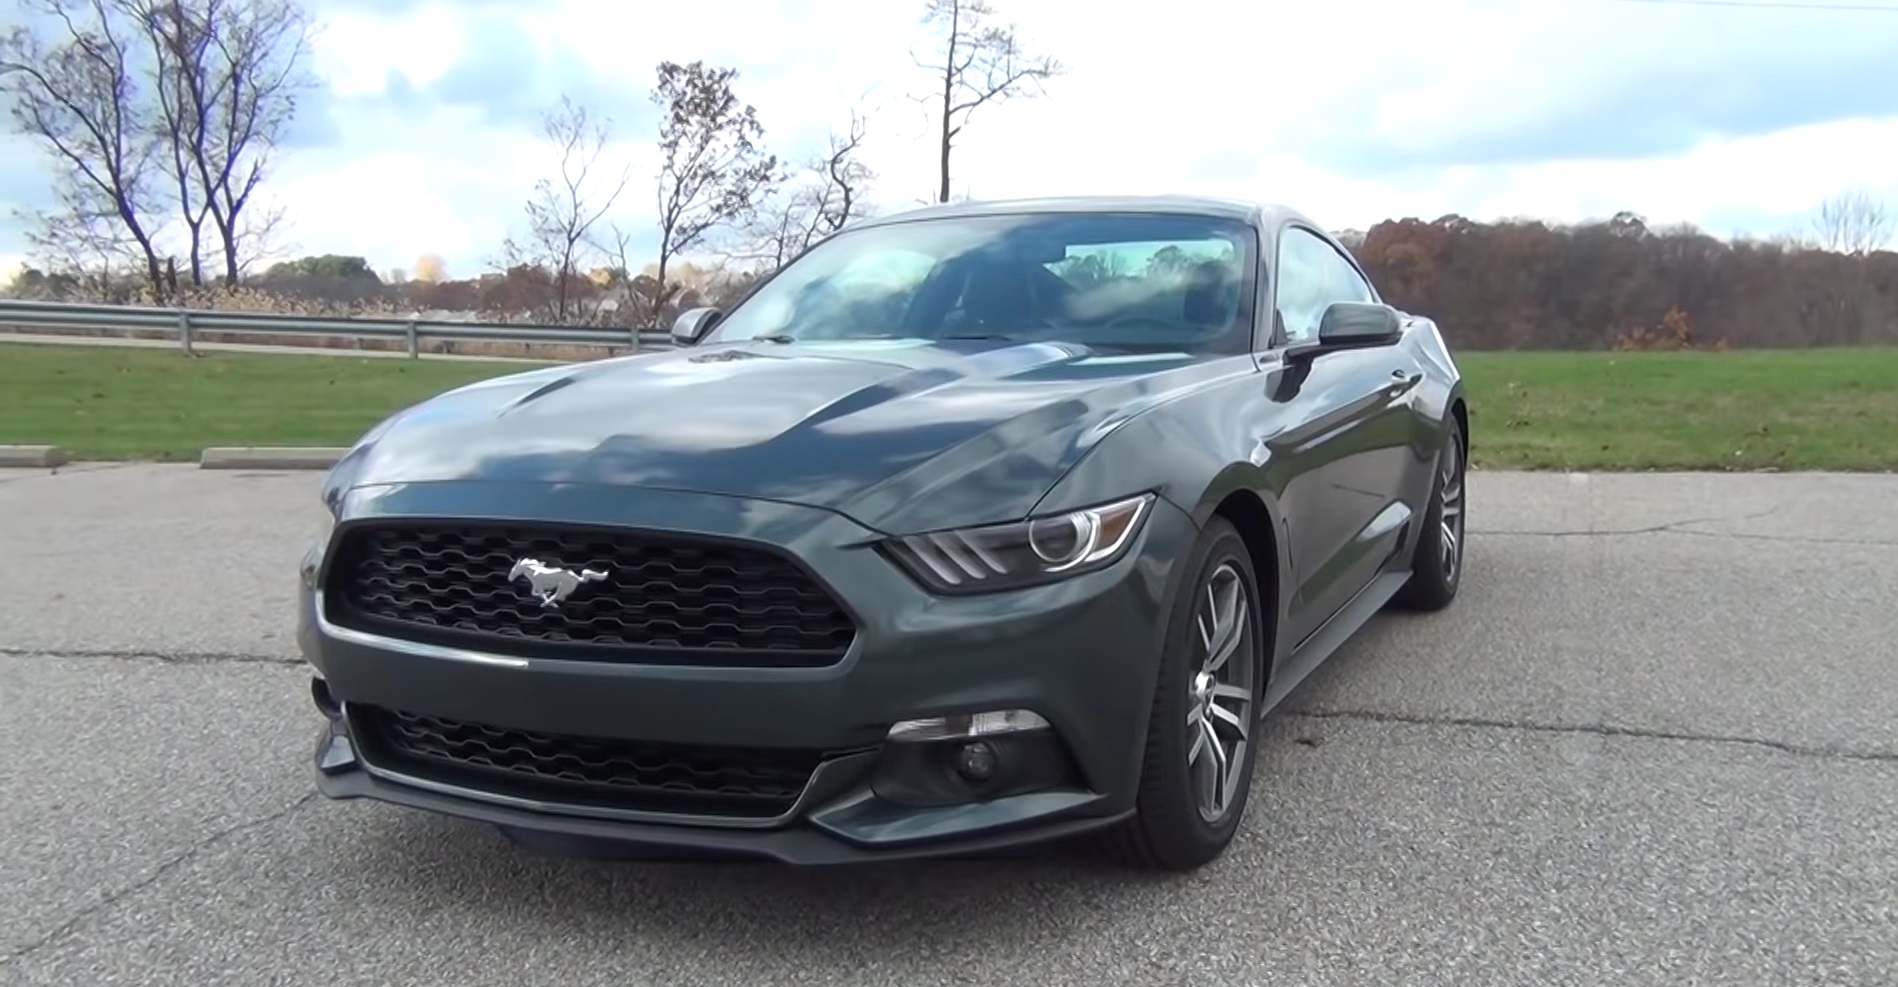 Video: 2015 Ford Mustang EcoBoost Premium In-Depth Tour